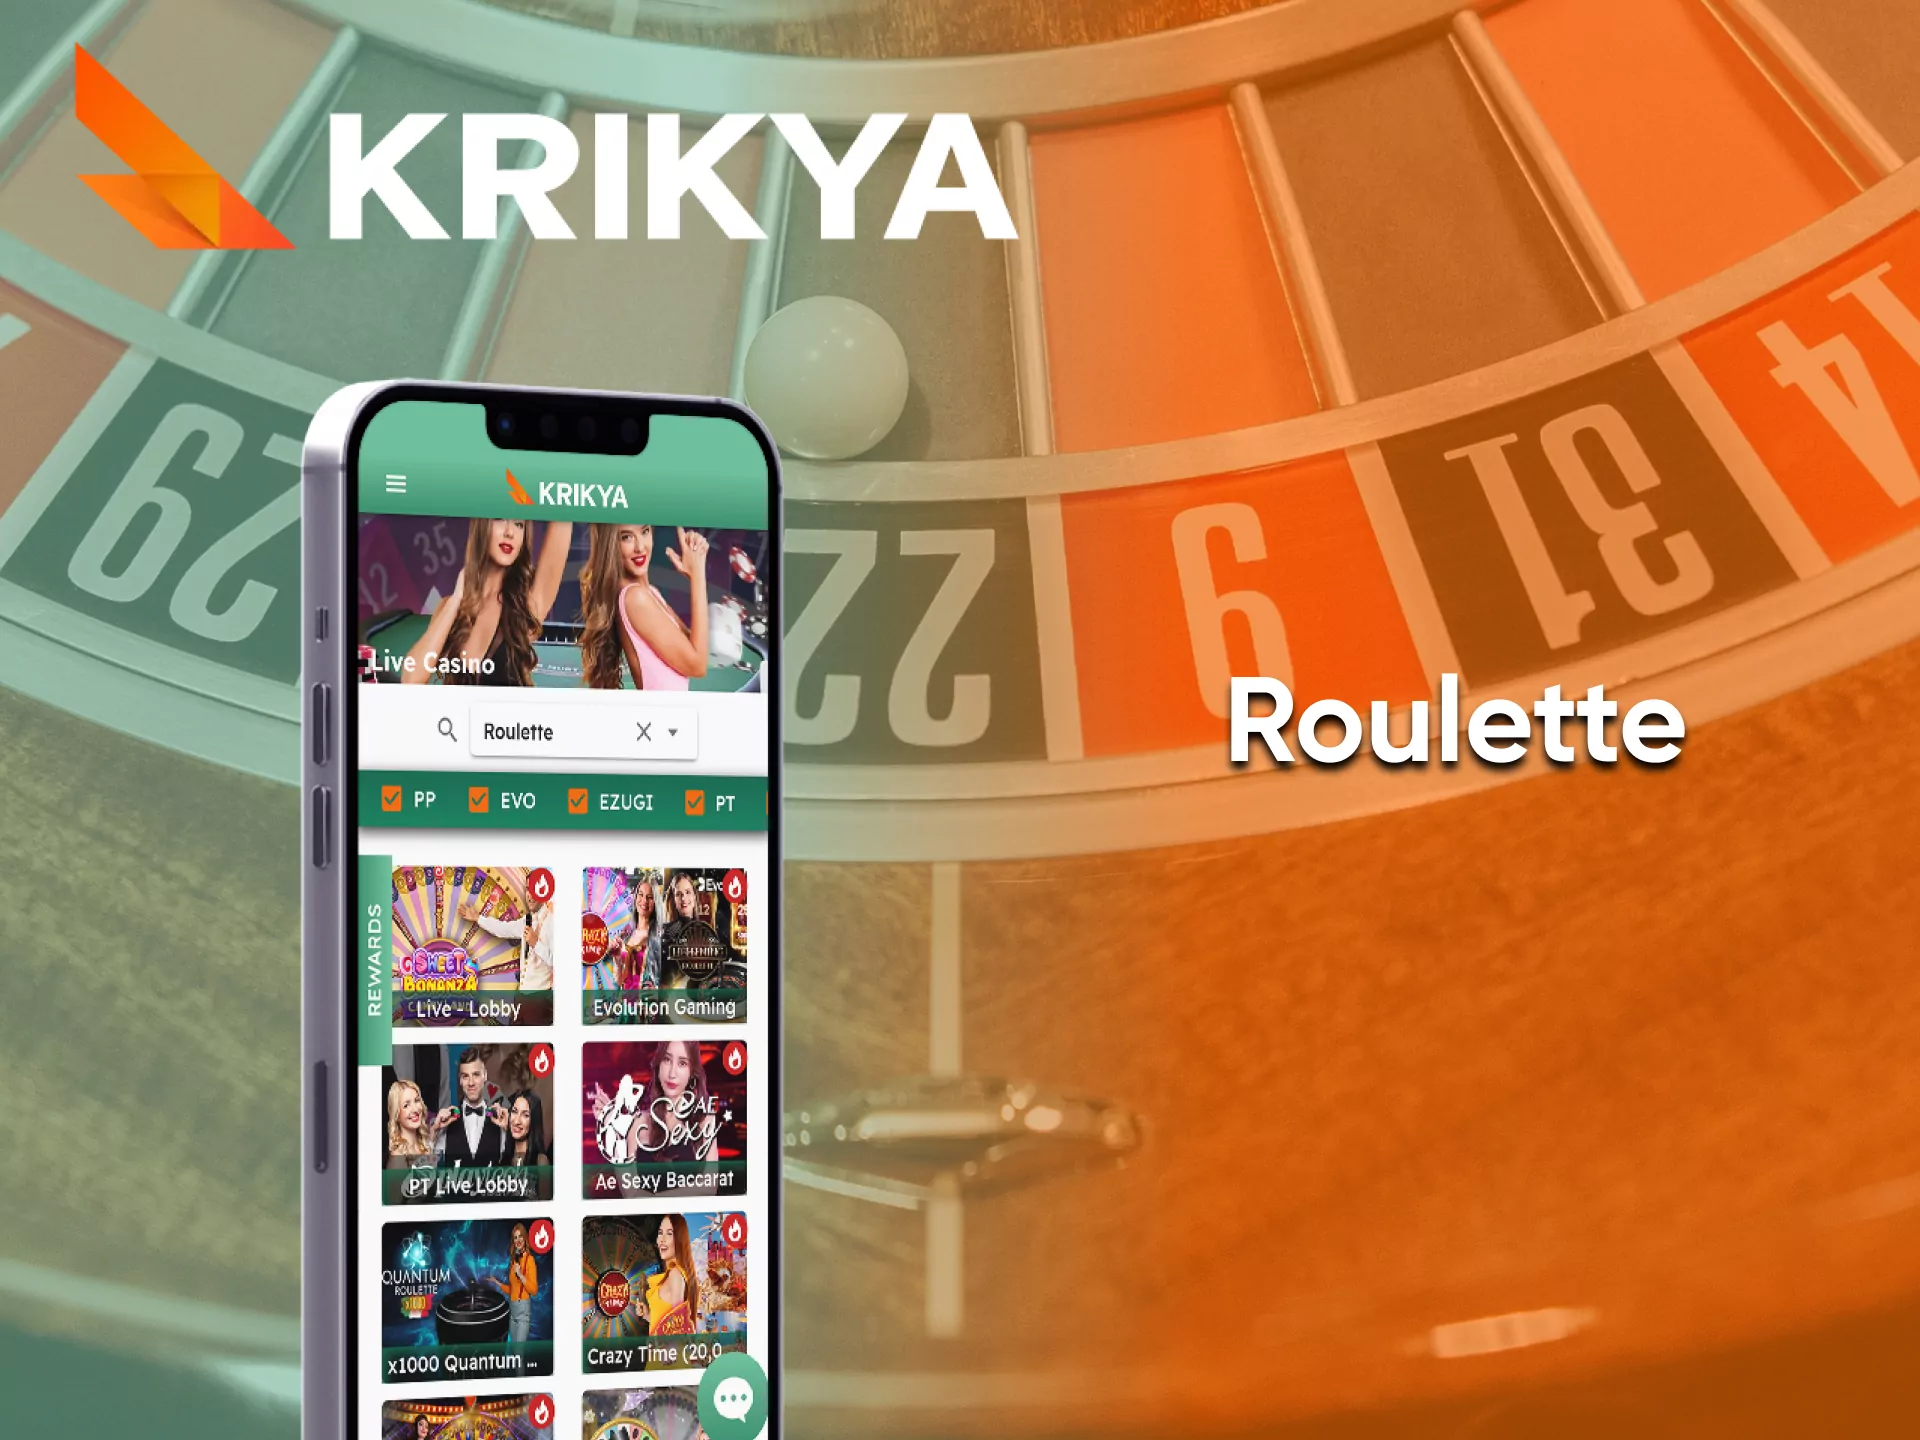 Roulette is a game that you can play through the Krikya app.